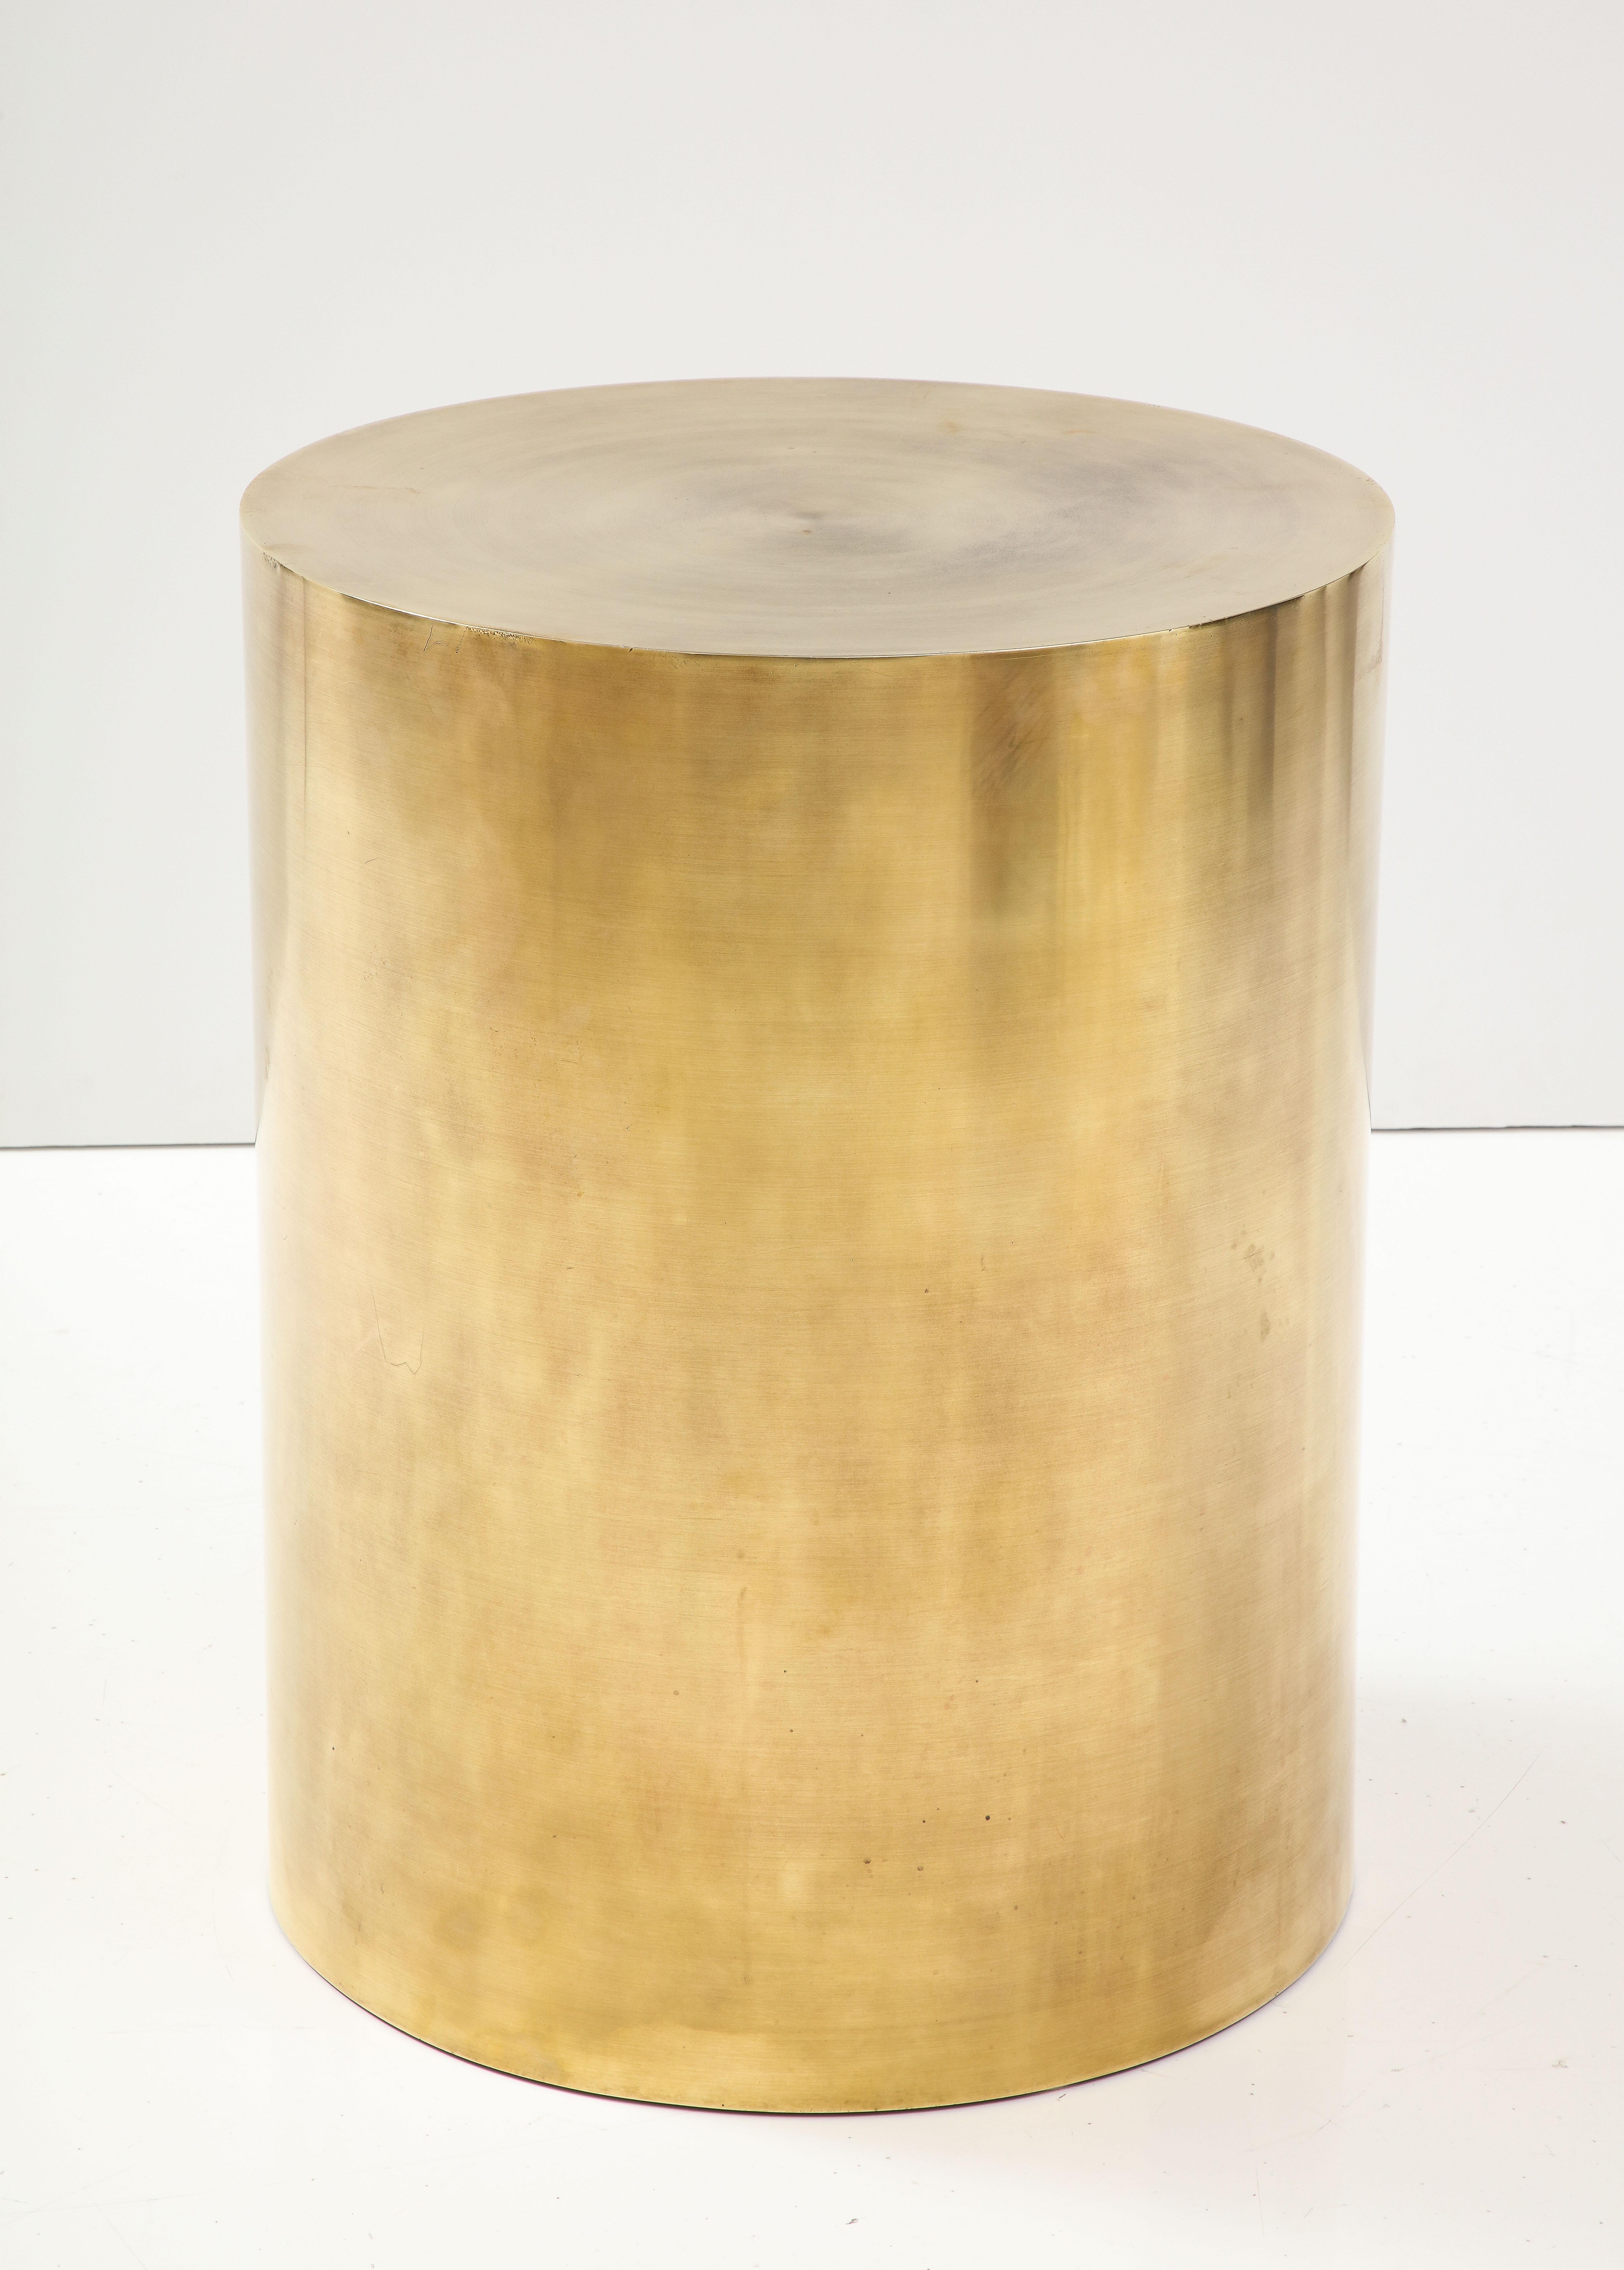 1970's Mid-Century Modern Brass Drum Dining Table Attributed To Brueton For Sale 5